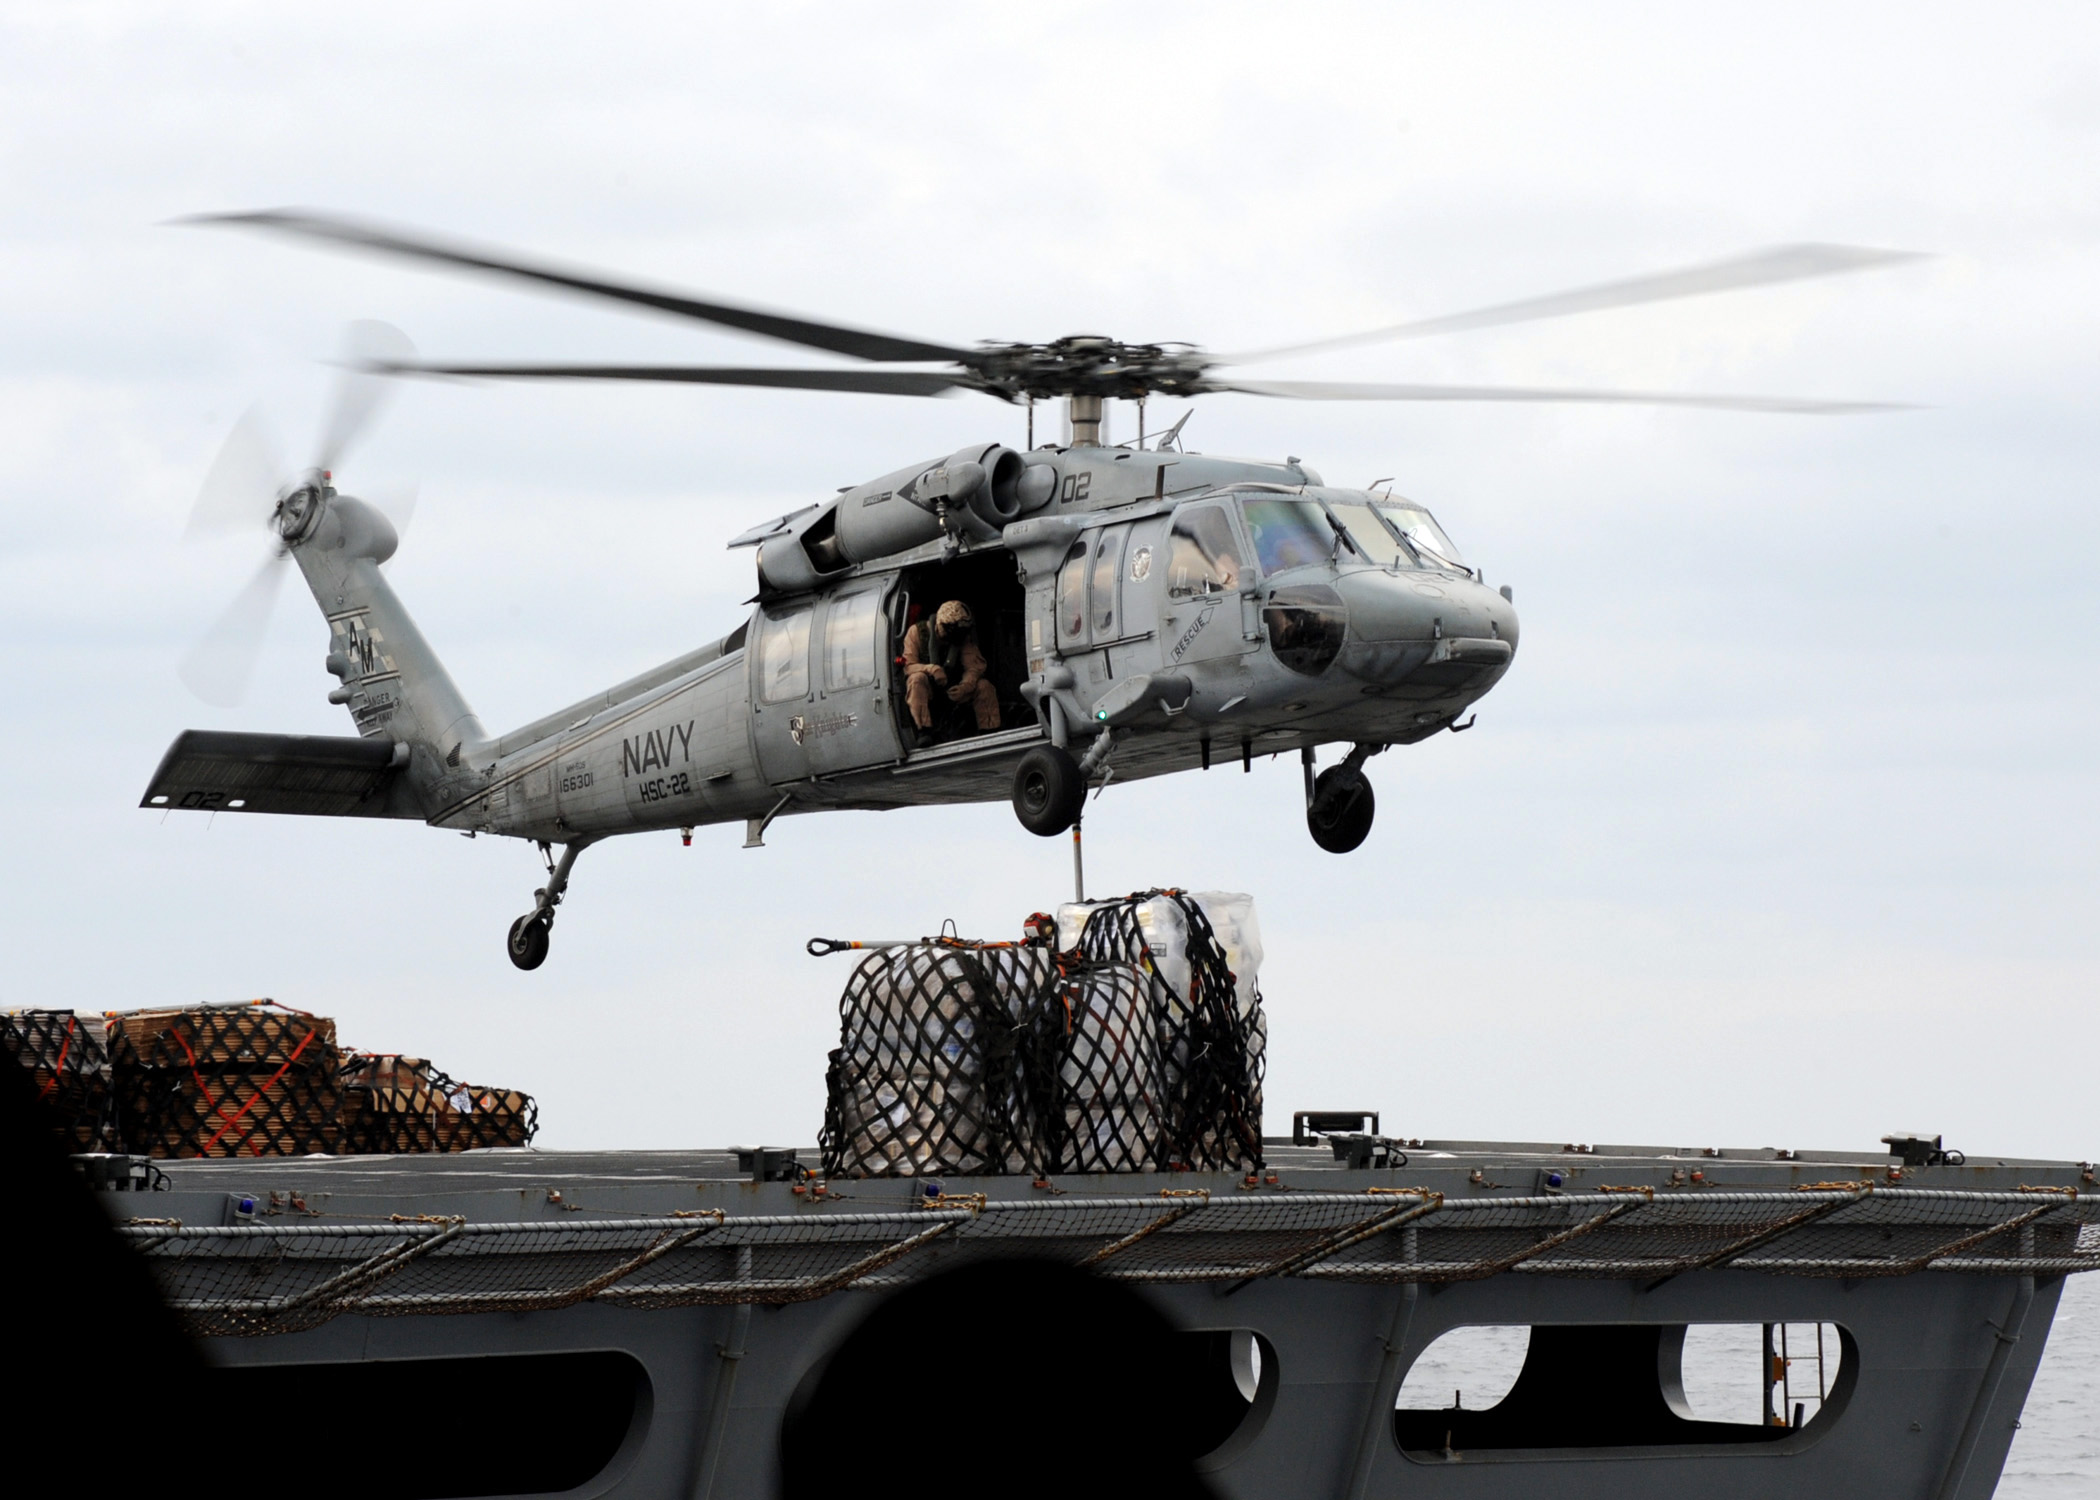 US Navy 090121-N-2562S-002 An MH-60S Sea Hawk helicopter transfers cargo makes a cargo pick-up during a replenishment at sea between the aircraft carrier USS Theodore Roosevelt (CVN 71) and USNS Supply (T-AOE 6)